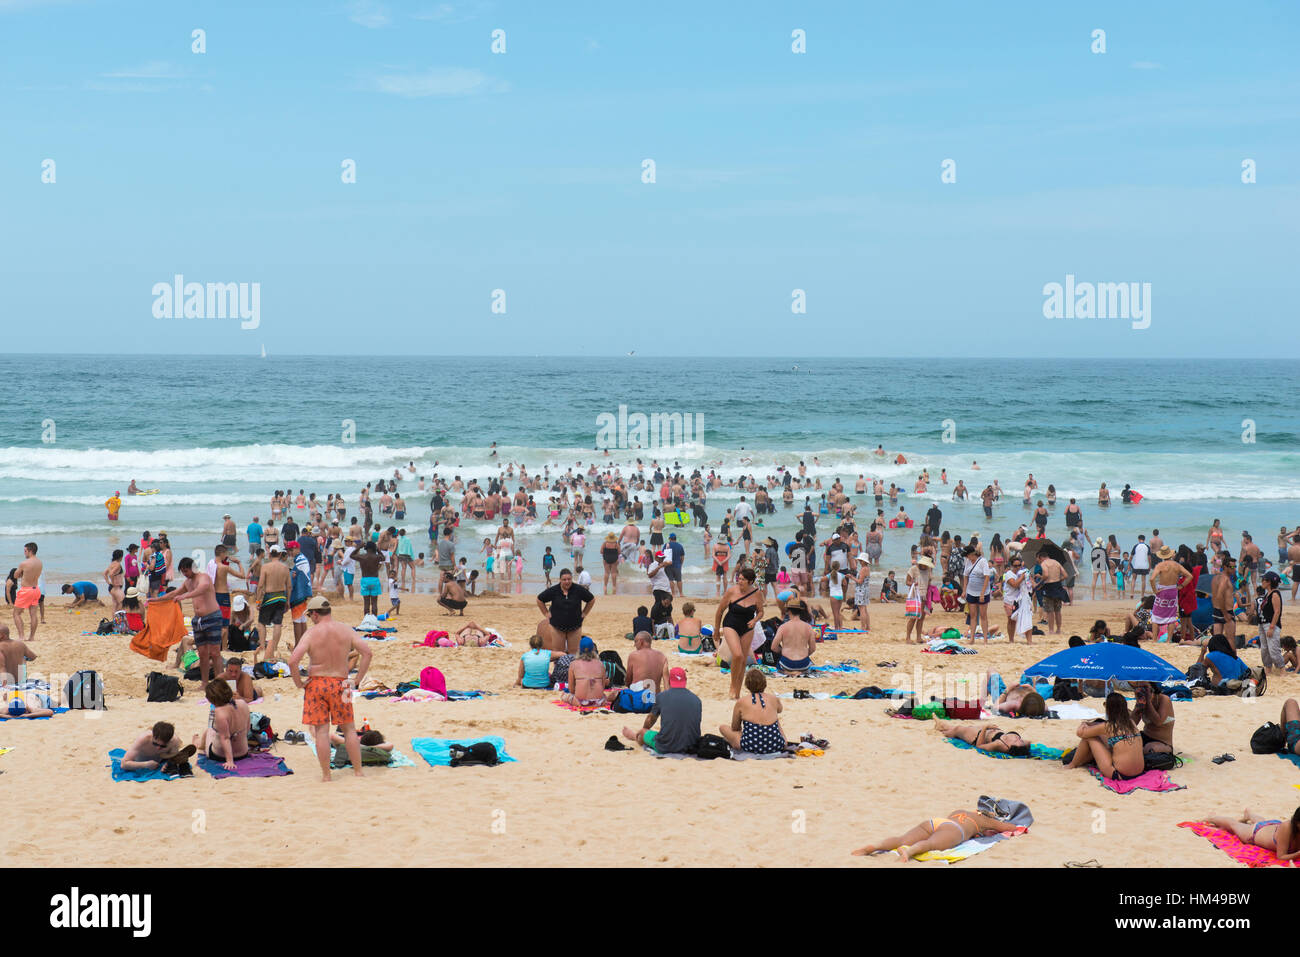 Boxing Day On Manly Beach Sydney New South Wales Australia Stock Photo Alamy,How To Cook Jasmine Brown Rice